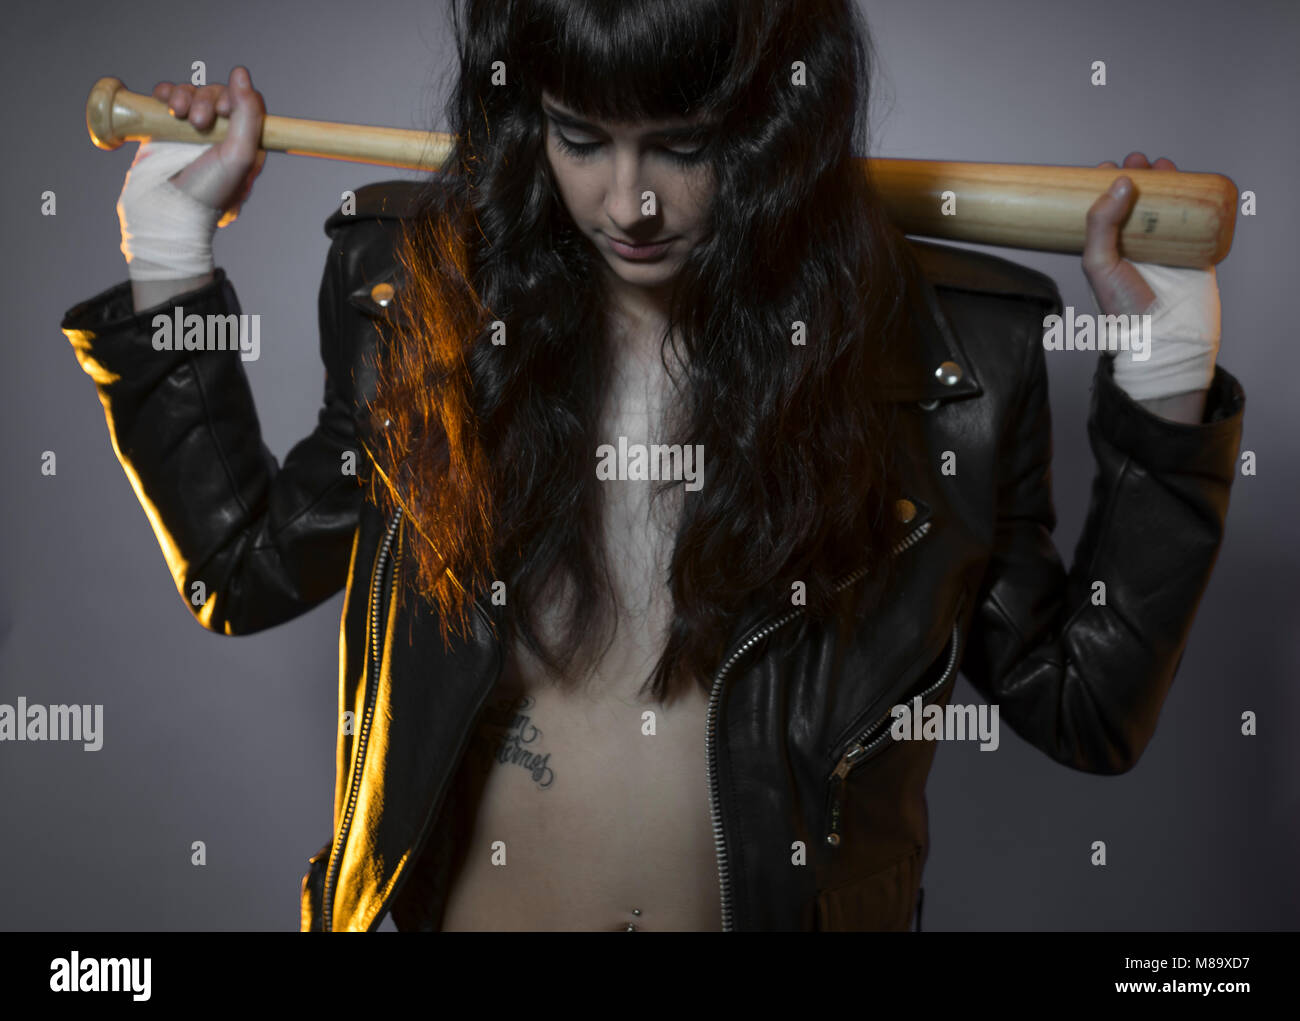 adolescence and delinquency, brunette woman in leather jacket and baseball bat with challenging aptitude Stock Photo